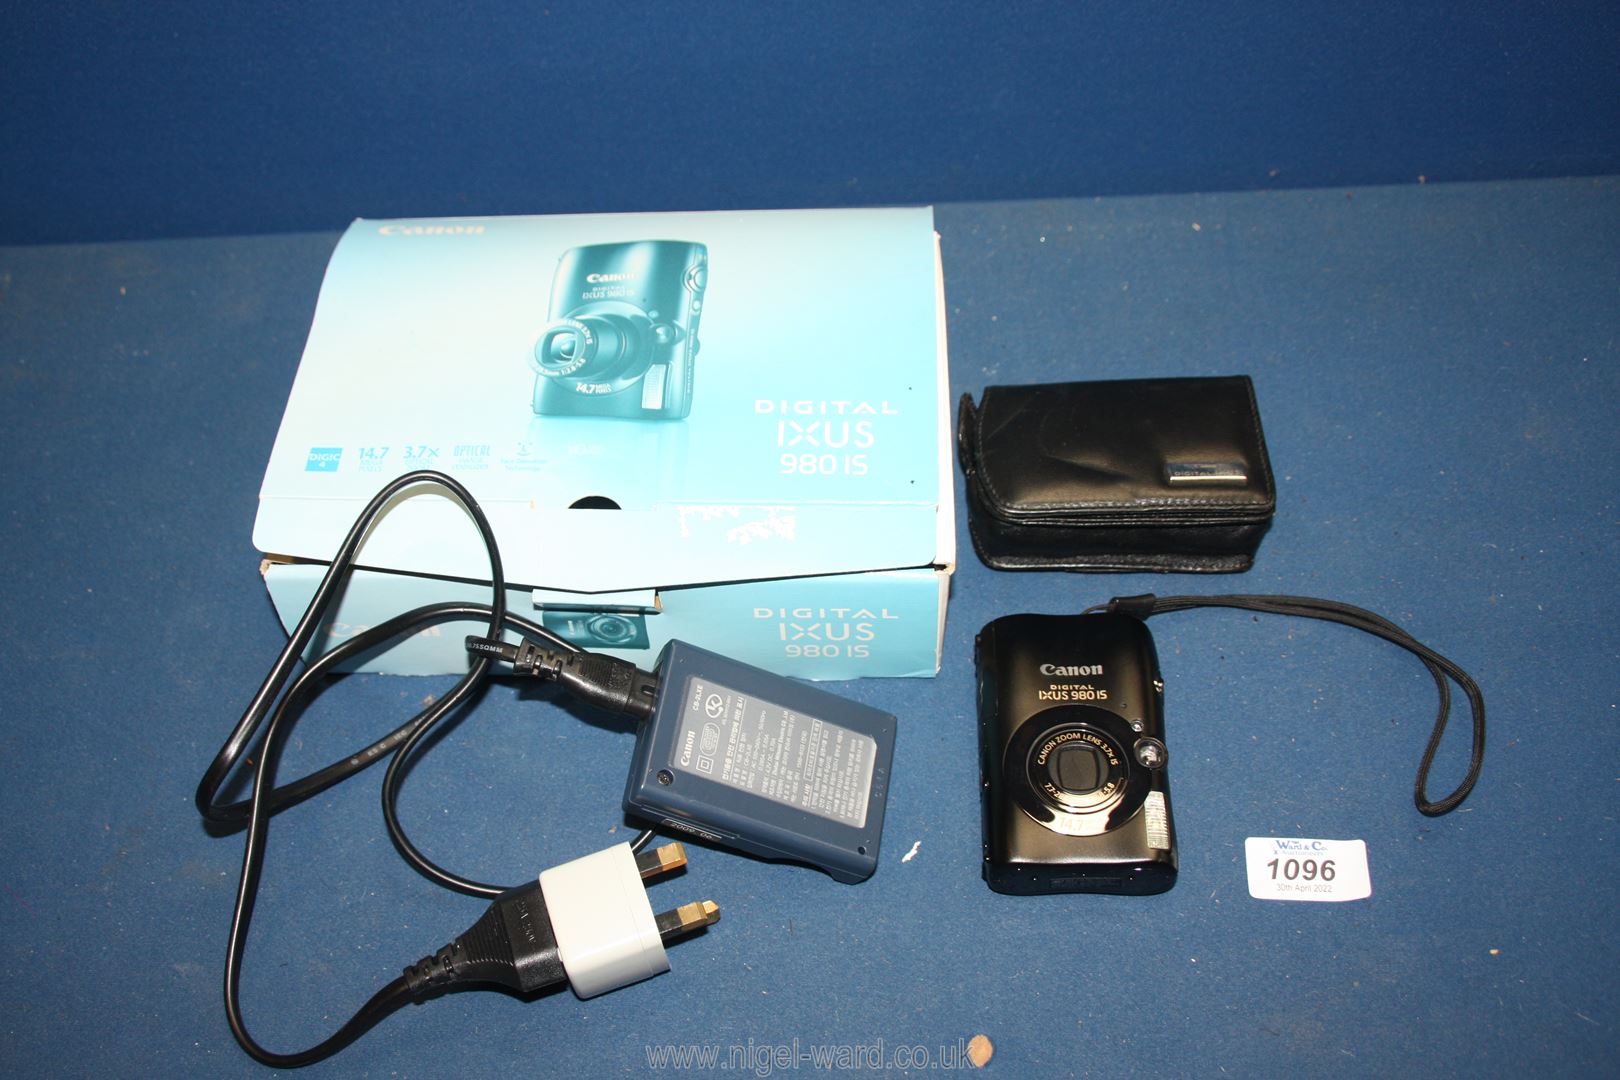 A Canon digital IXUS 9801S camera 14.7 mp. including case and box, with battery charger.